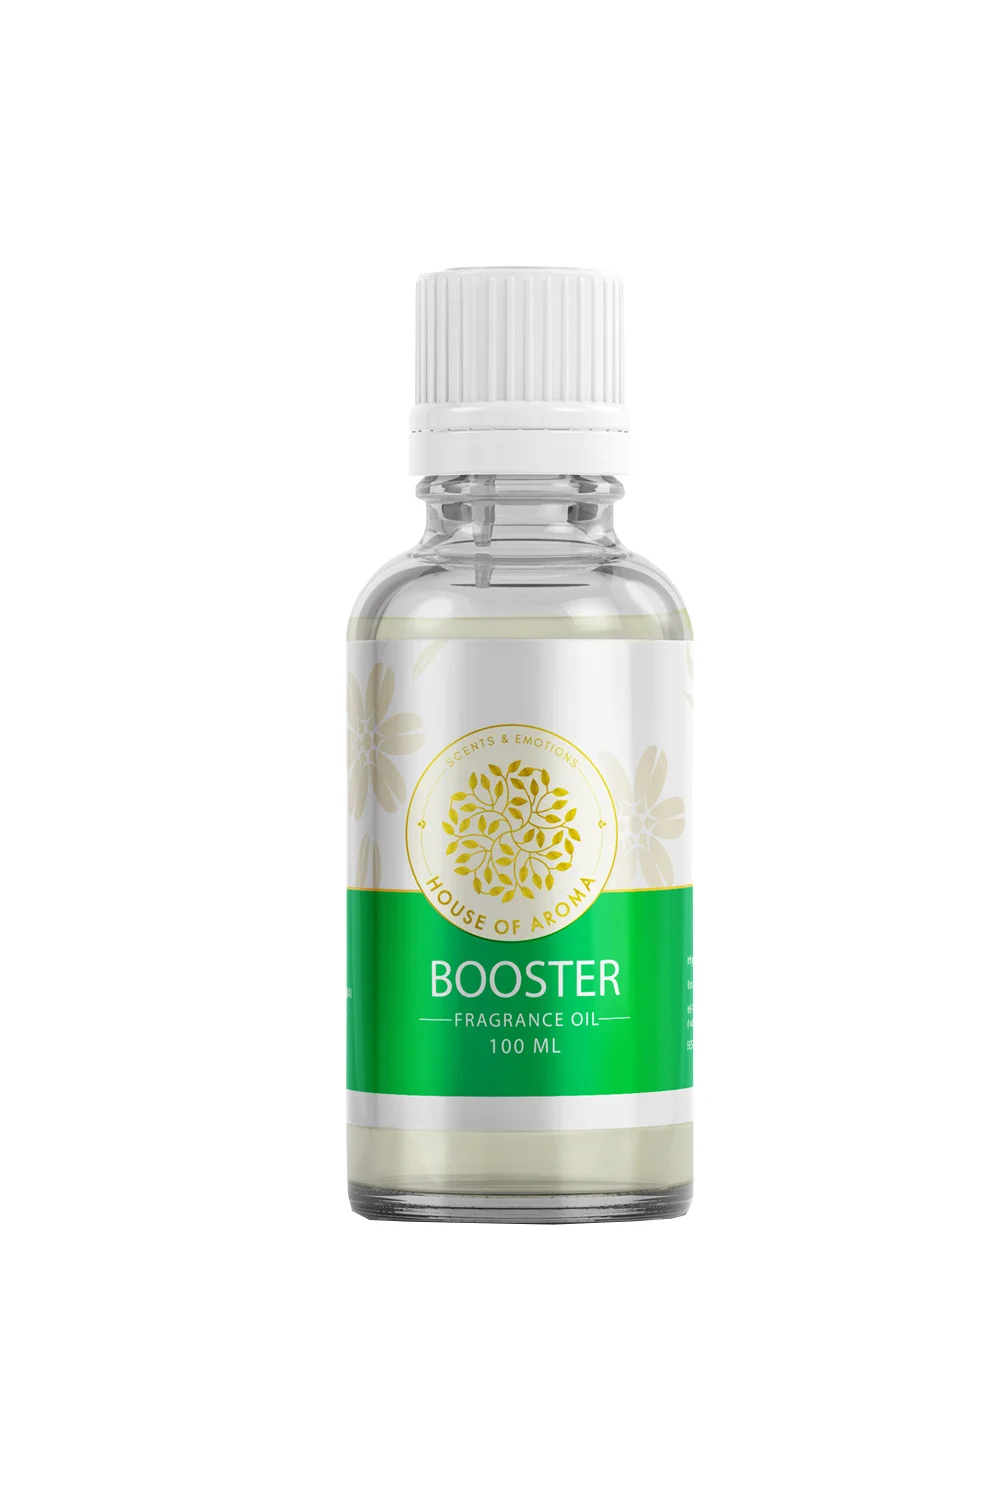 booster fragrance oil 100ml, Fragrance Oil, Aroma oil, Synthetic oils, Fragrance oil for candles, oil for diffusers, Aromatic oil, Candle oil, Aromatherapy oil, oil manufacturers, House of Aroma, booster fragrance oil,, fragrance of happiness, booster oil, fragrance booster for scent, booster oil, booster aroma oil, booster oil for relaxation, booster scented oil, floral fragrance oil